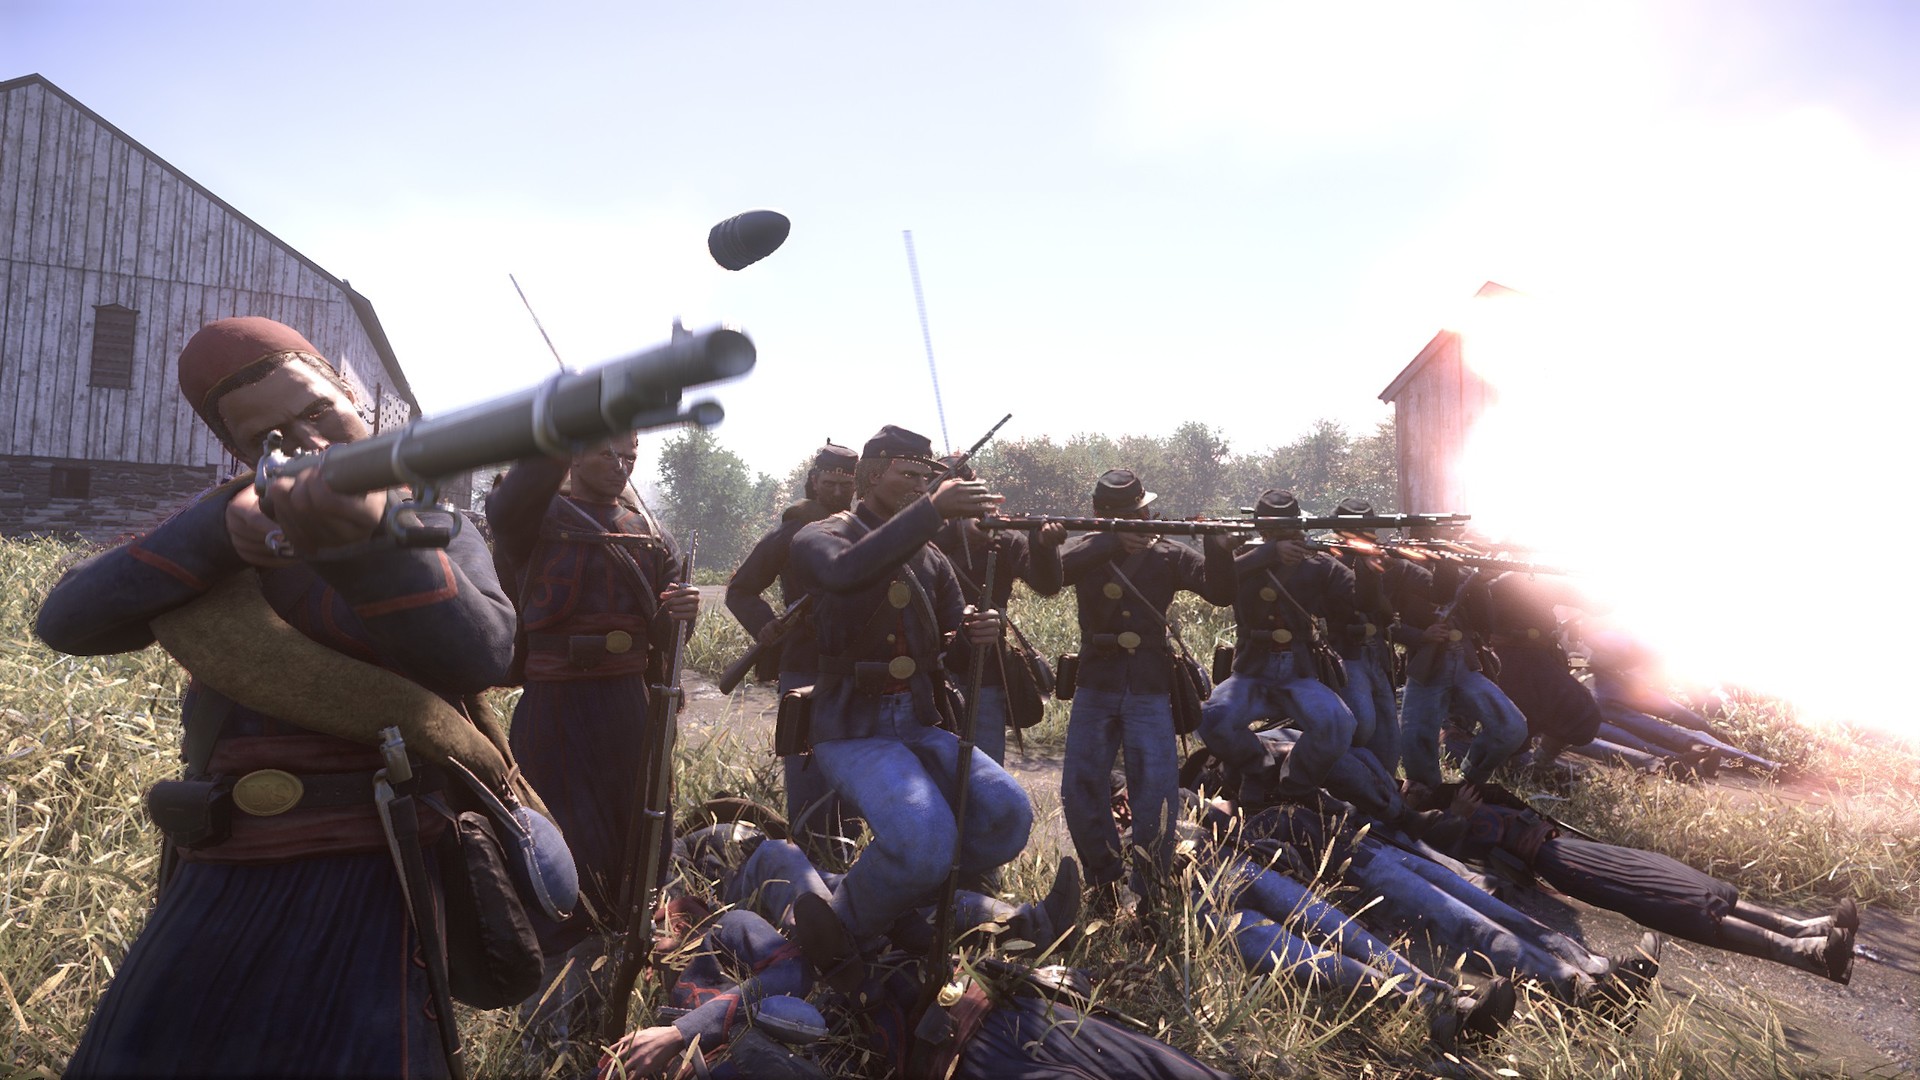 war of rights download free